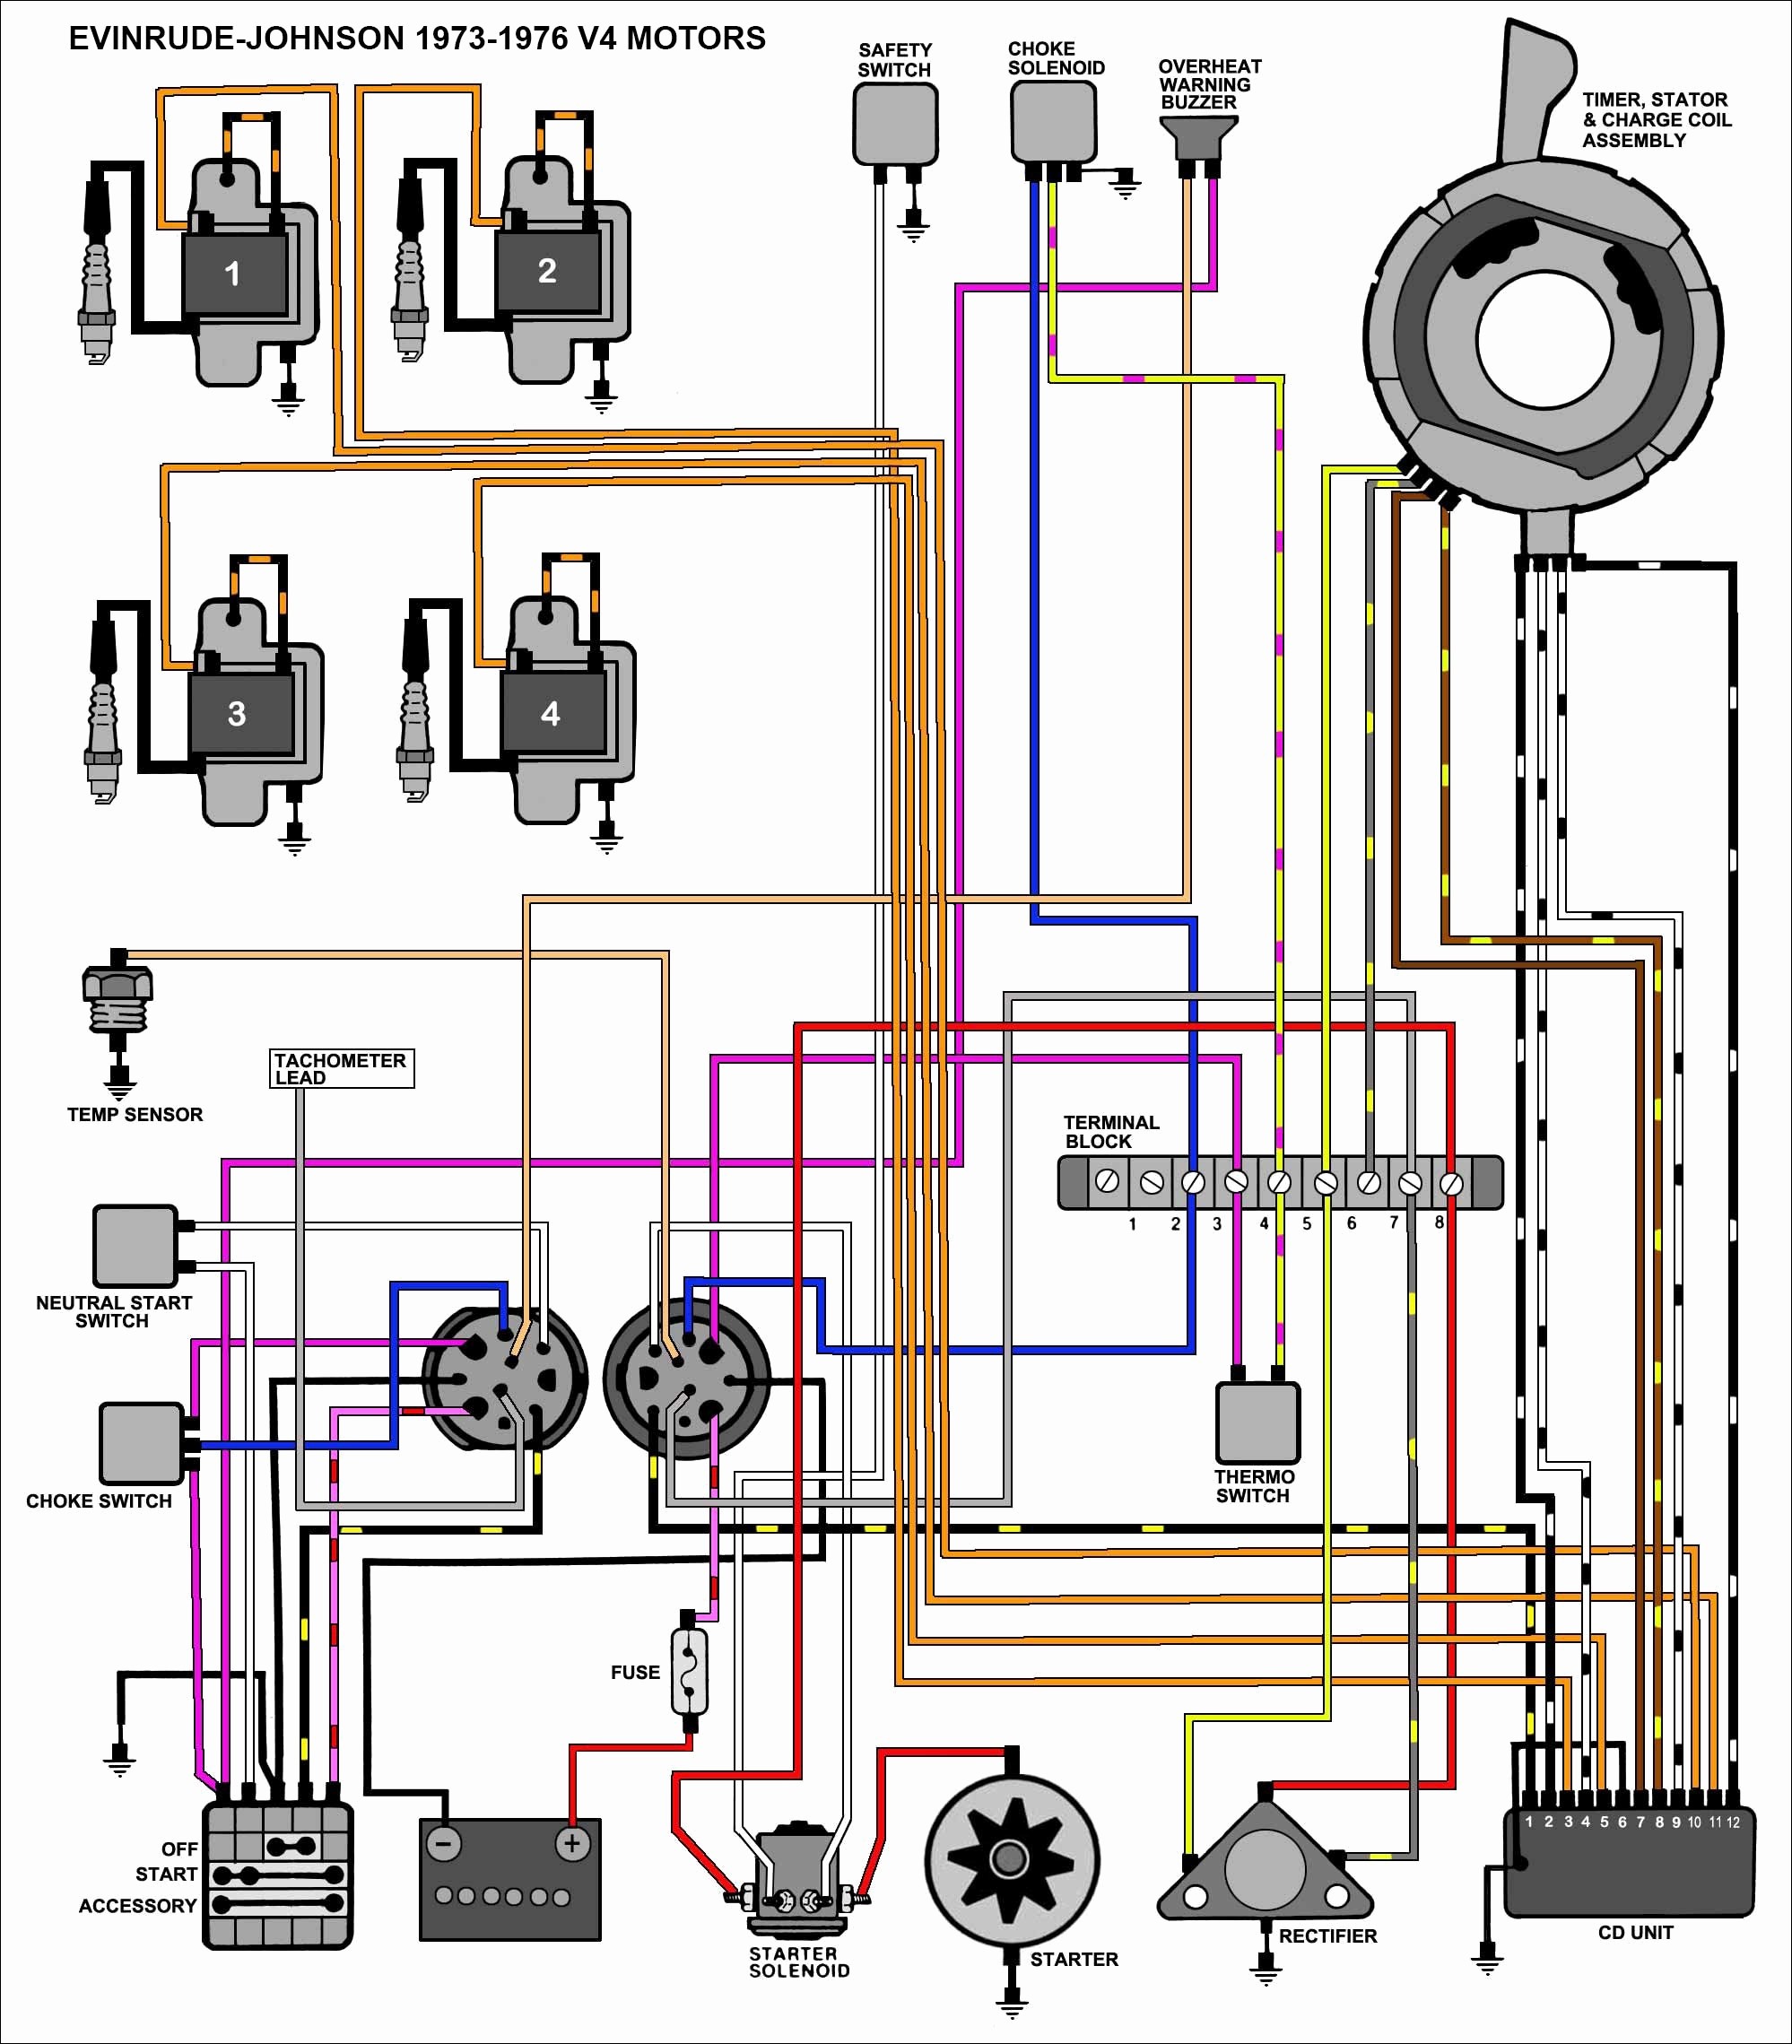 3 Position Ignition Switch Wiring Diagram Inspirational Mercury Outboard Wiring Diagram Pinterest Striking Ignition Switch